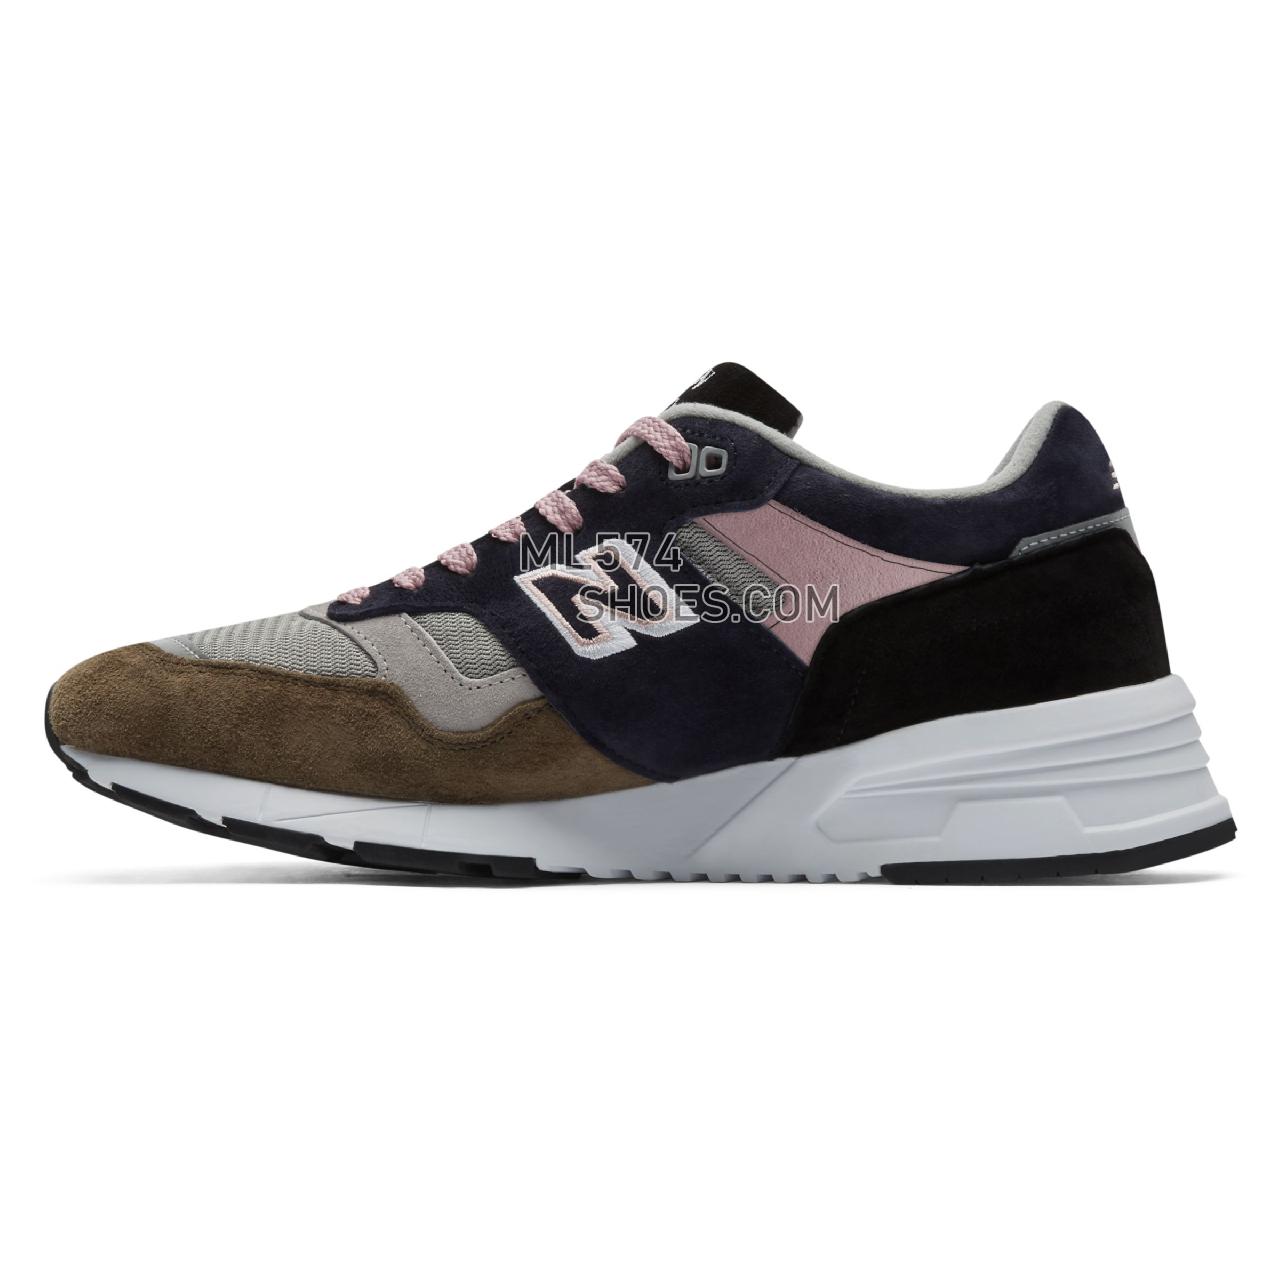 New Balance Made in UK 1530 Soft Haze - Men's Made in UK 1530 Soft Haze Classic - Grey with Khaki and Navy - M1530KGL